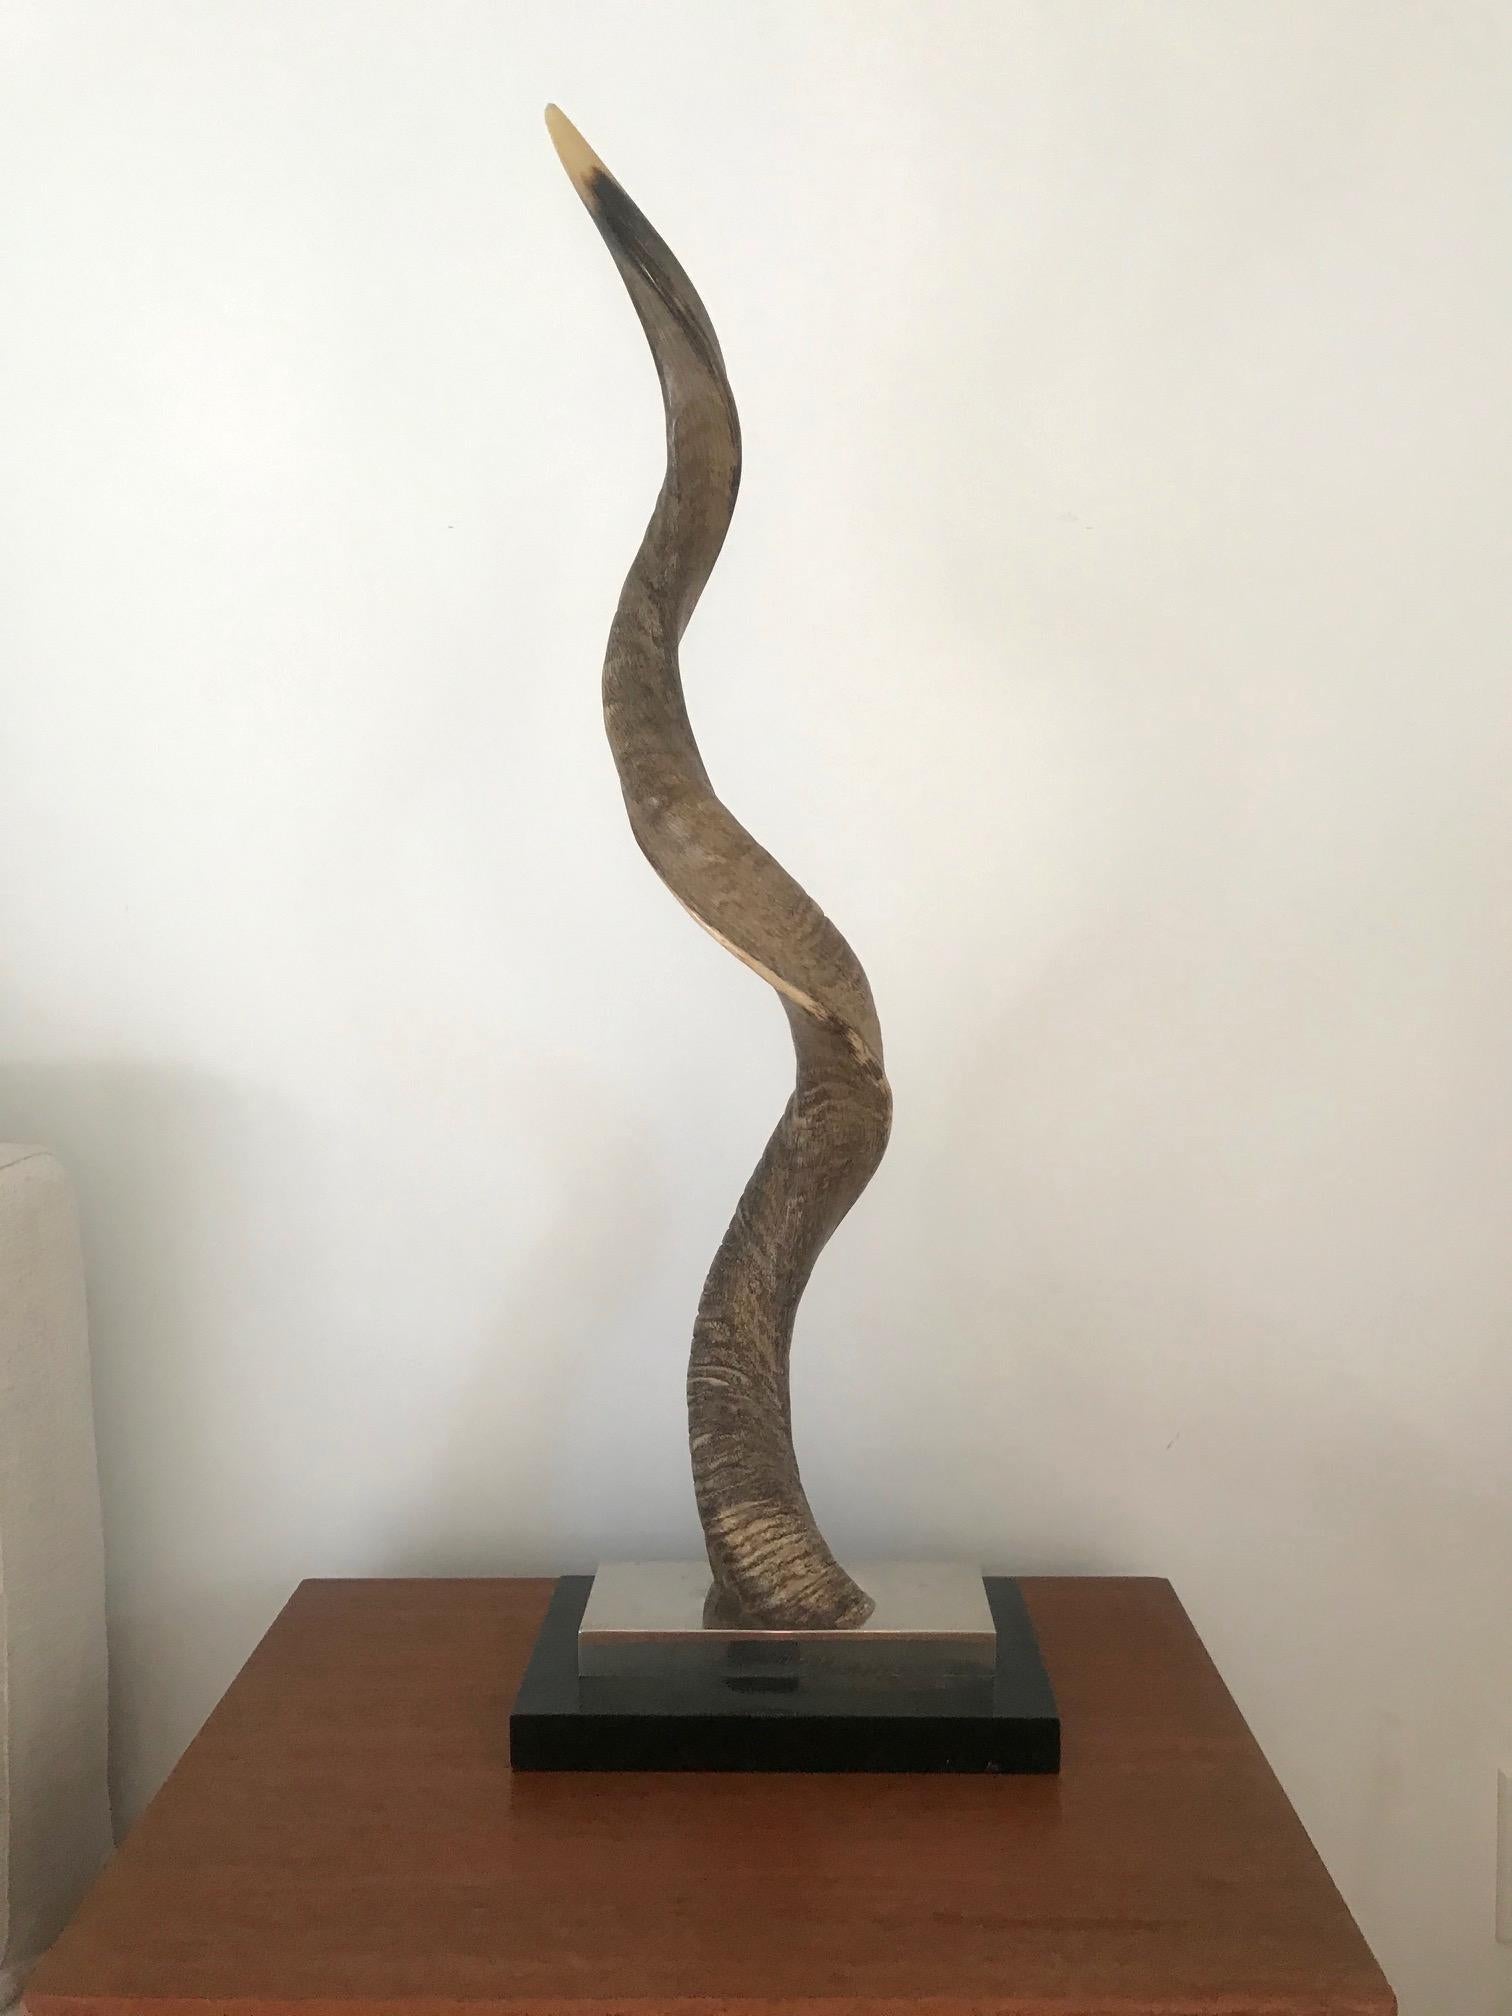 Lacquered Organic Modern African Kudu Horn Sculpture Mounted on Stand, Vintage, 1980s